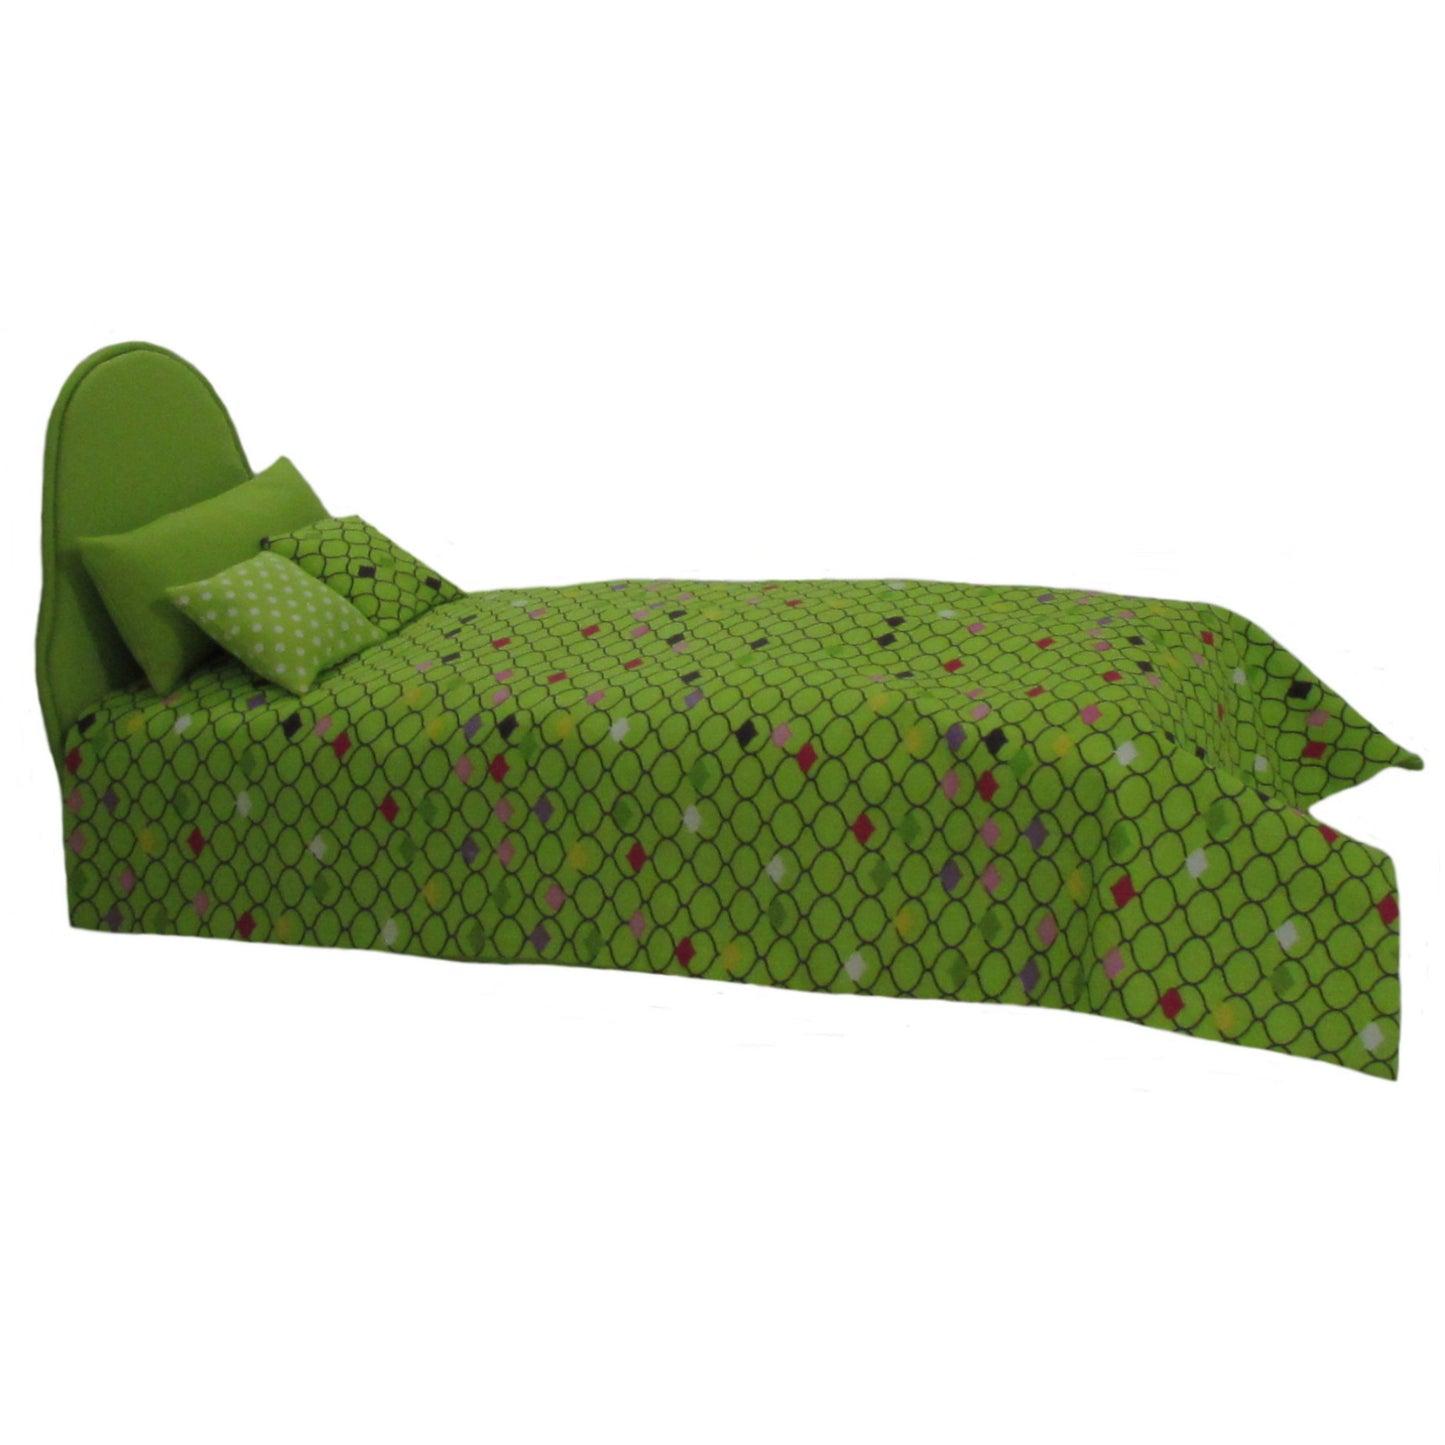 Light Green Doll Bed and Doll Bedding for 11.5-inch and 12-inch dolls